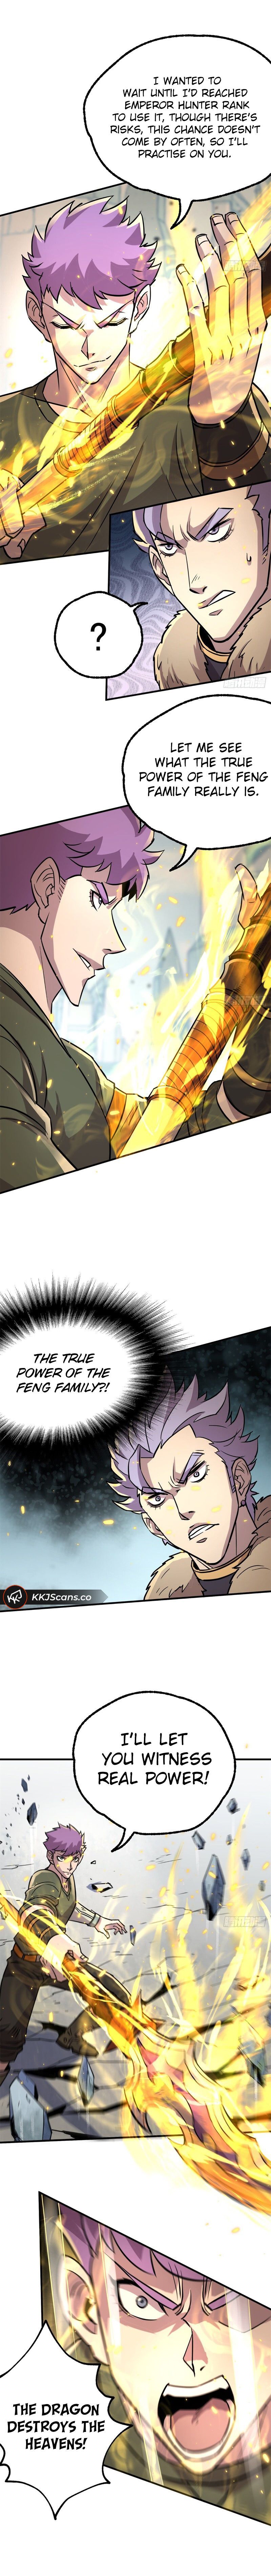 The Hunter Chapter 184 page 8